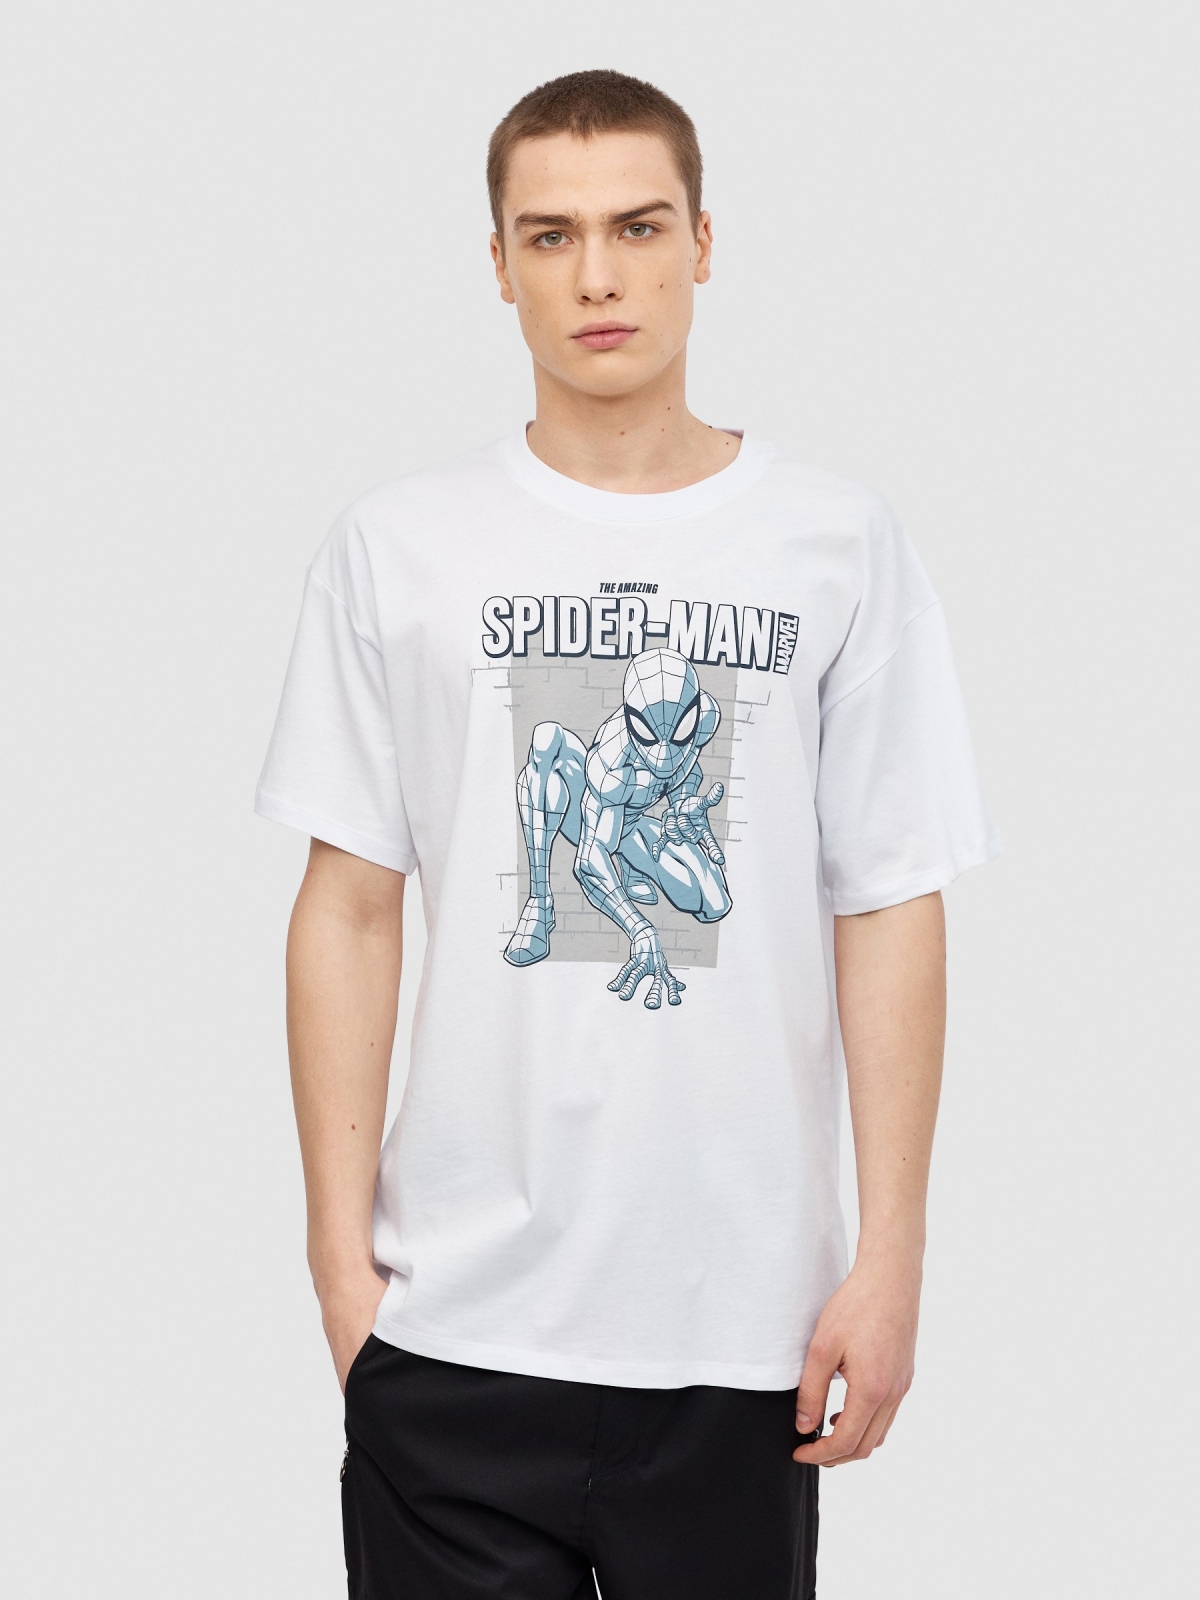 Oversize Spiderman T-shirt white middle front view